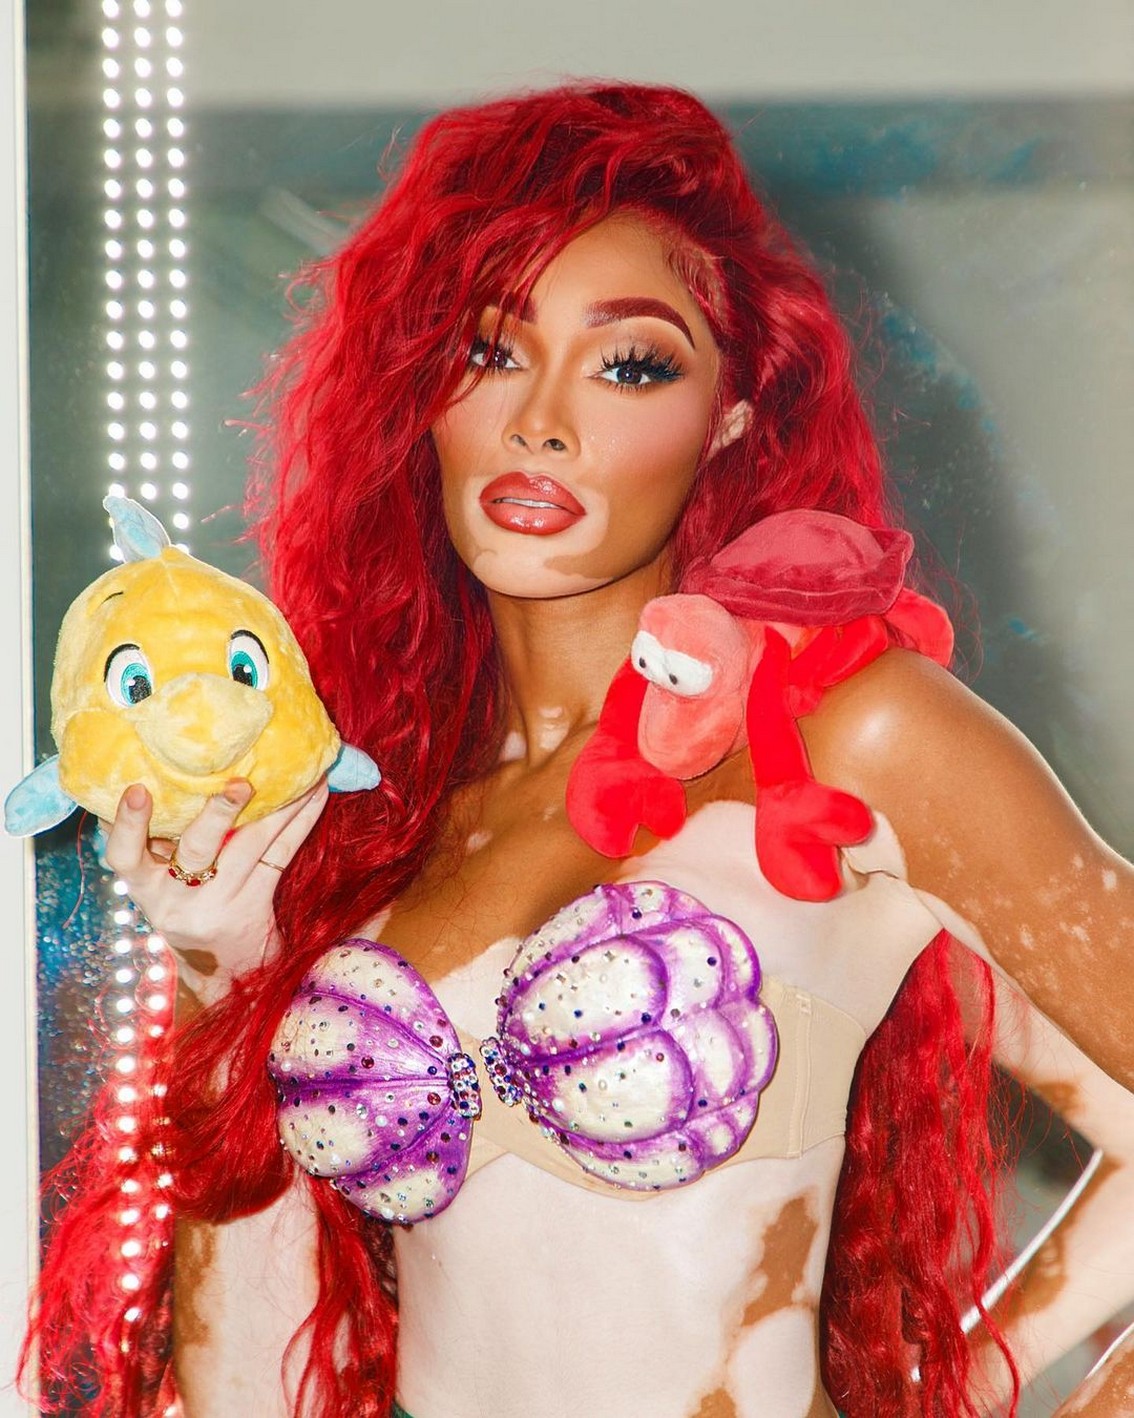 Winnie Harlow Sexy Marmaid TheFappening.Pro 2 - Winnie Harlow Sexy Mermaid (7 Photos)